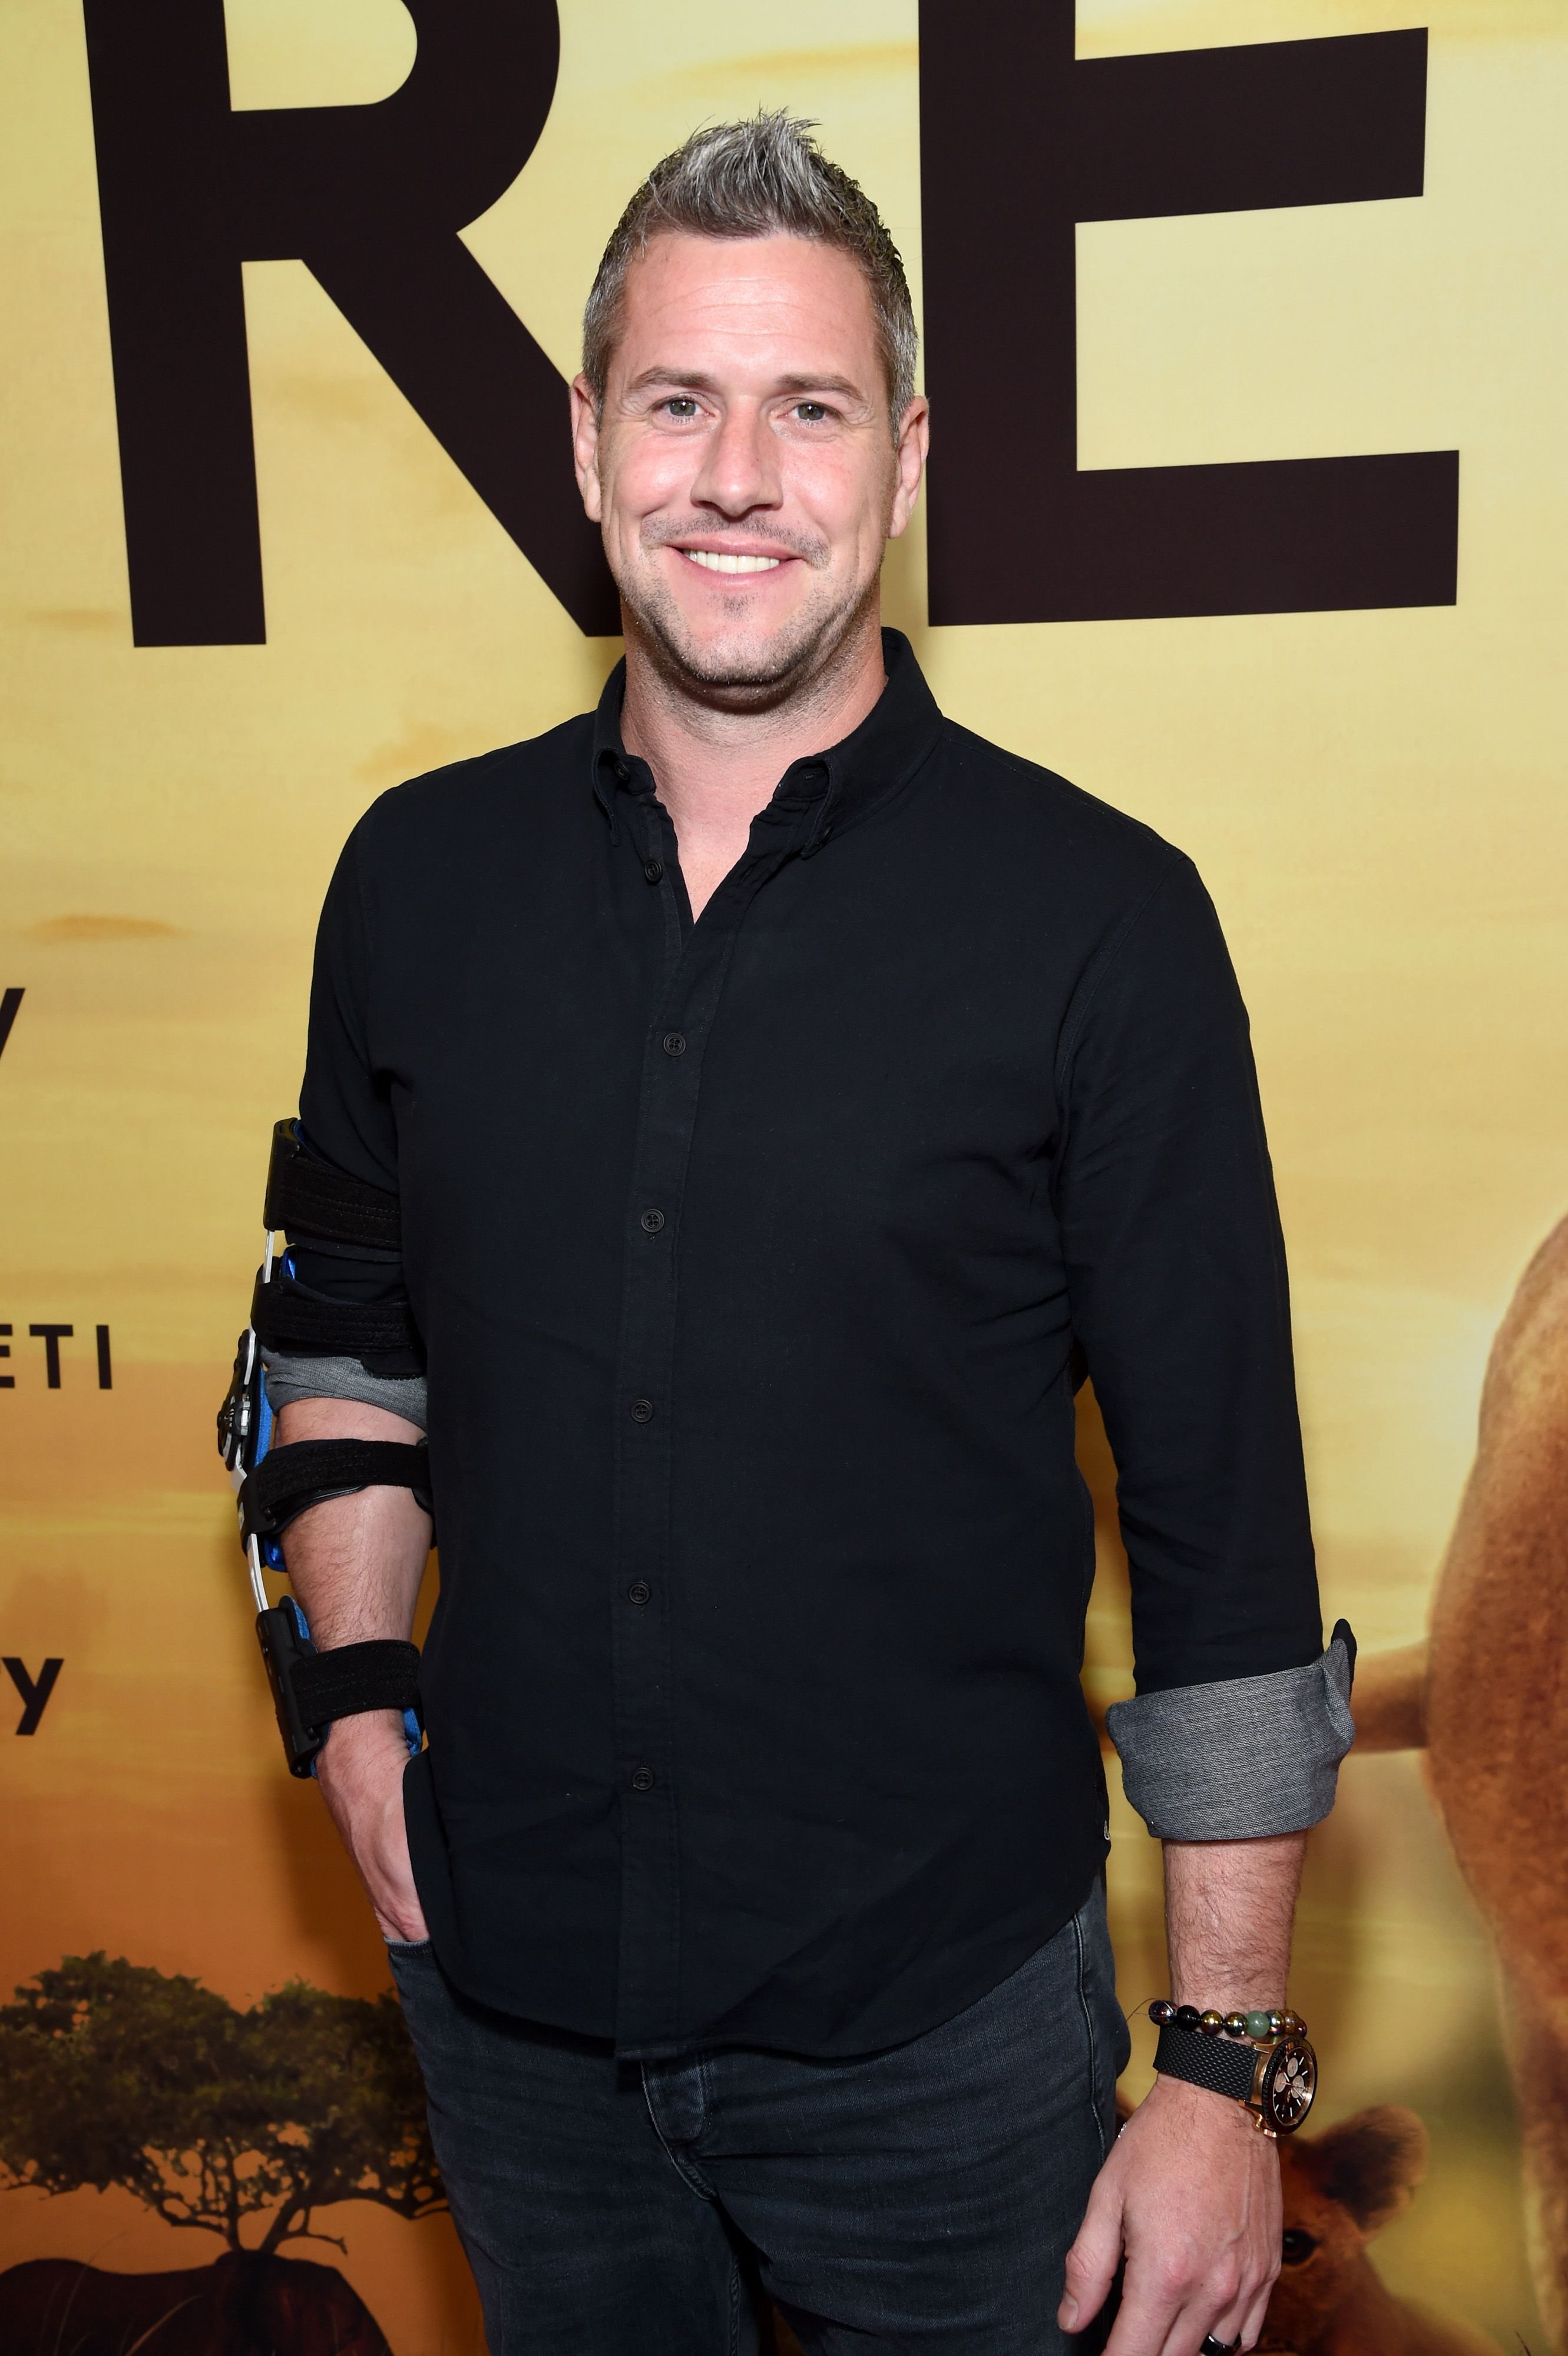 Ant Anstead attends Discovery's "Serengeti" premiere at Wallis Annenberg Center for the Performing Arts on July 23, 2019  | Source: Getty Images